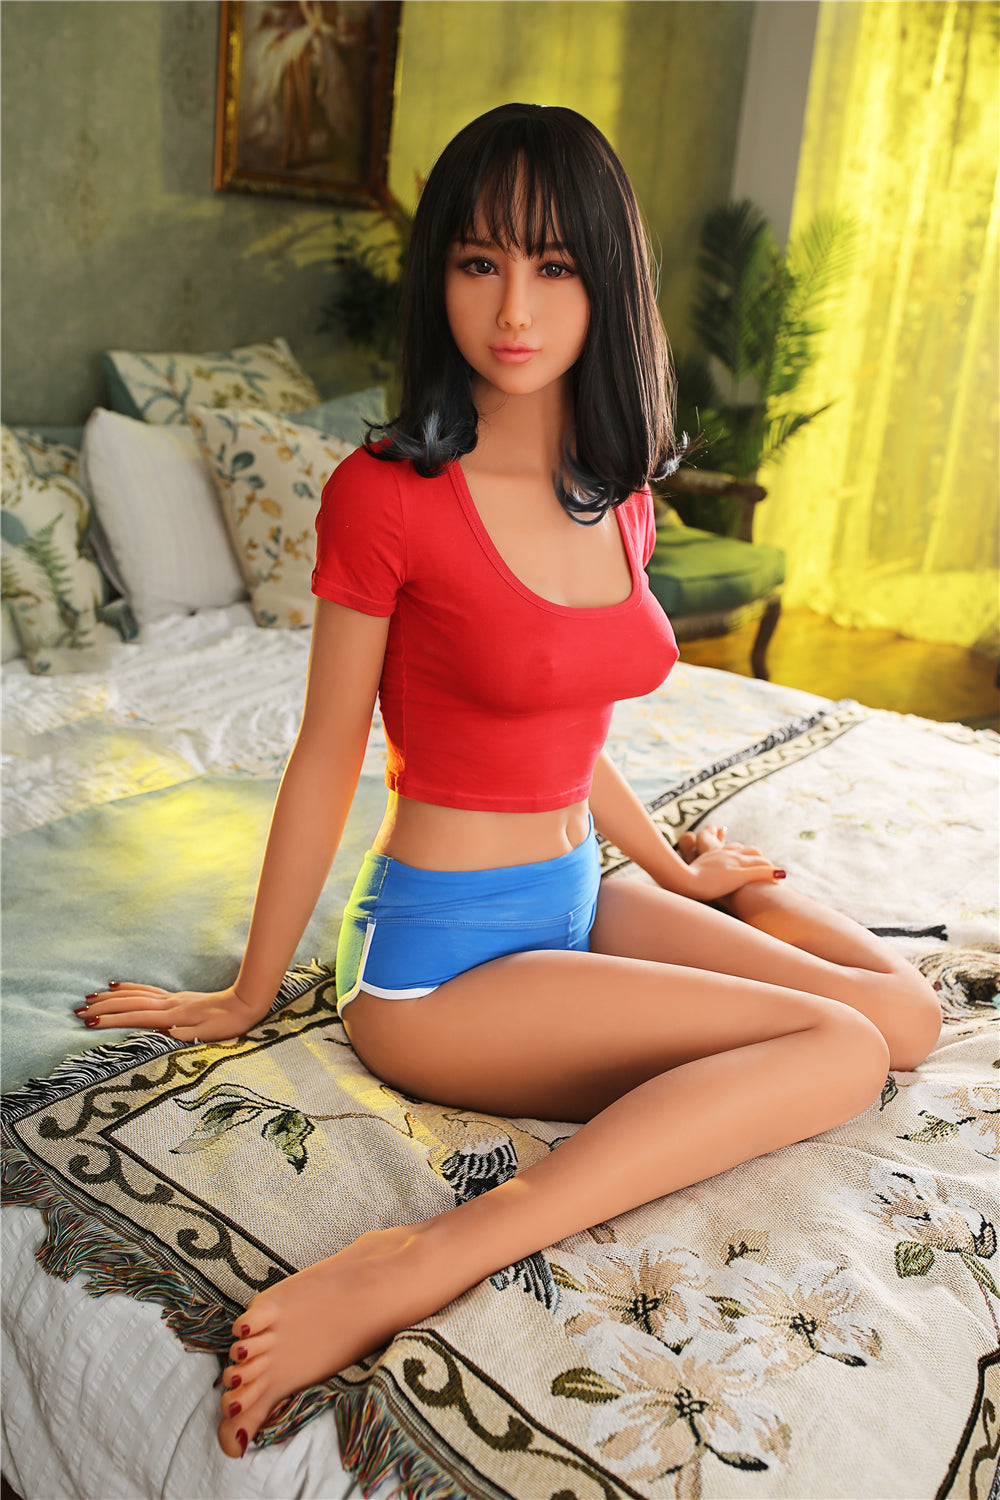 Irontech Doll 168 cm C TPE - Maisie (USA) | Buy Sex Dolls at DOLLS ACTUALLY